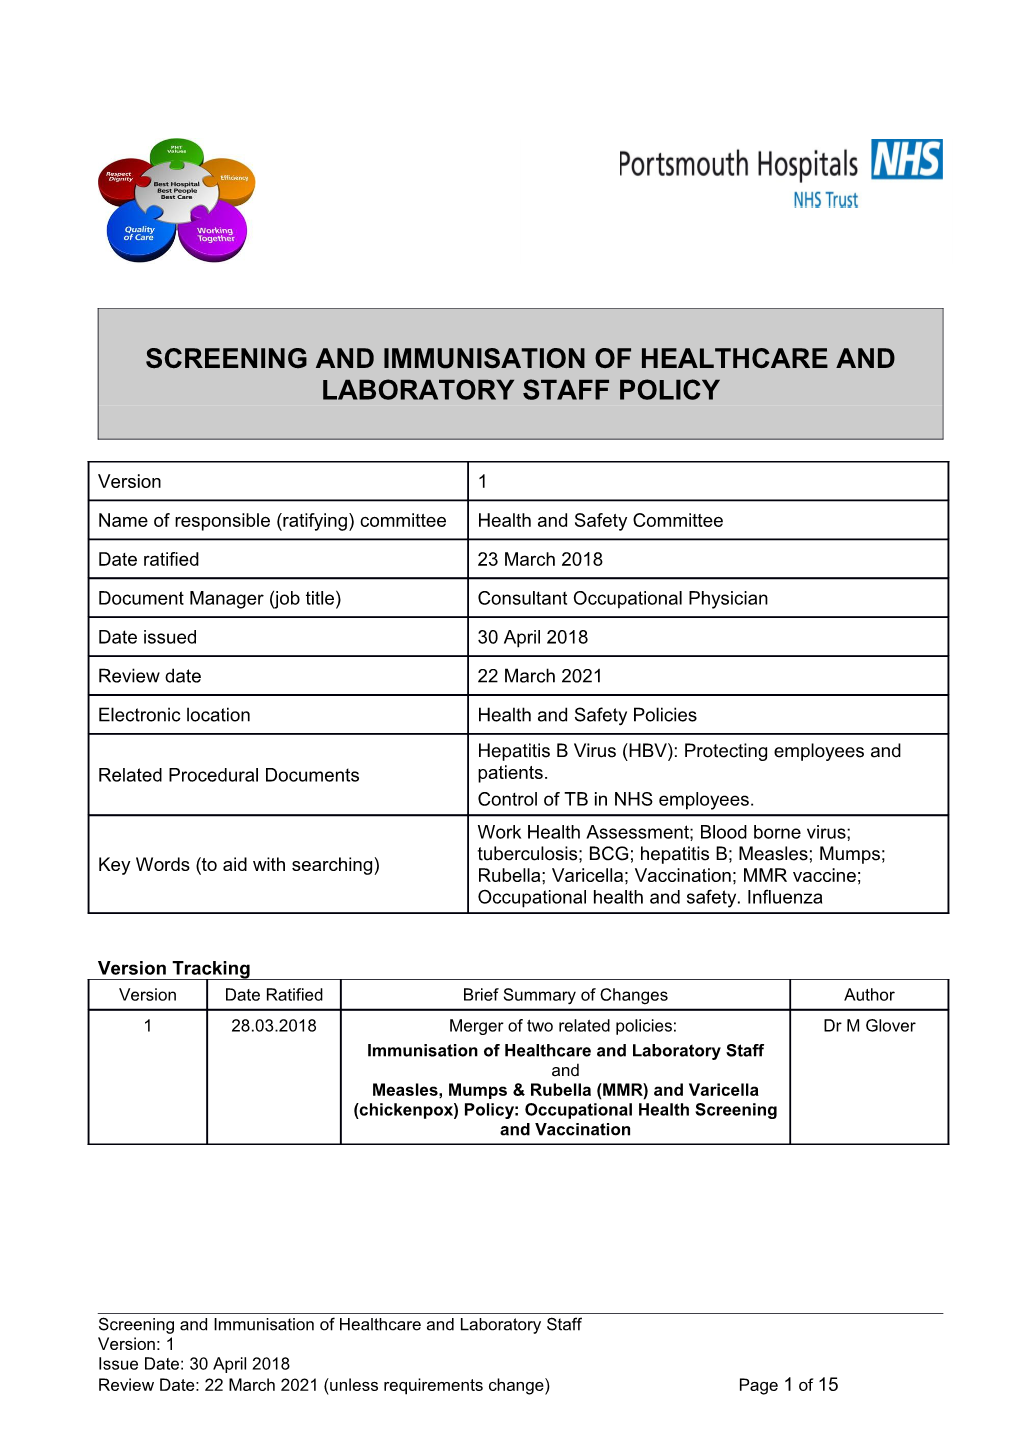 Screening and Immunisation of Healthcare and Laboratory Staff Policy